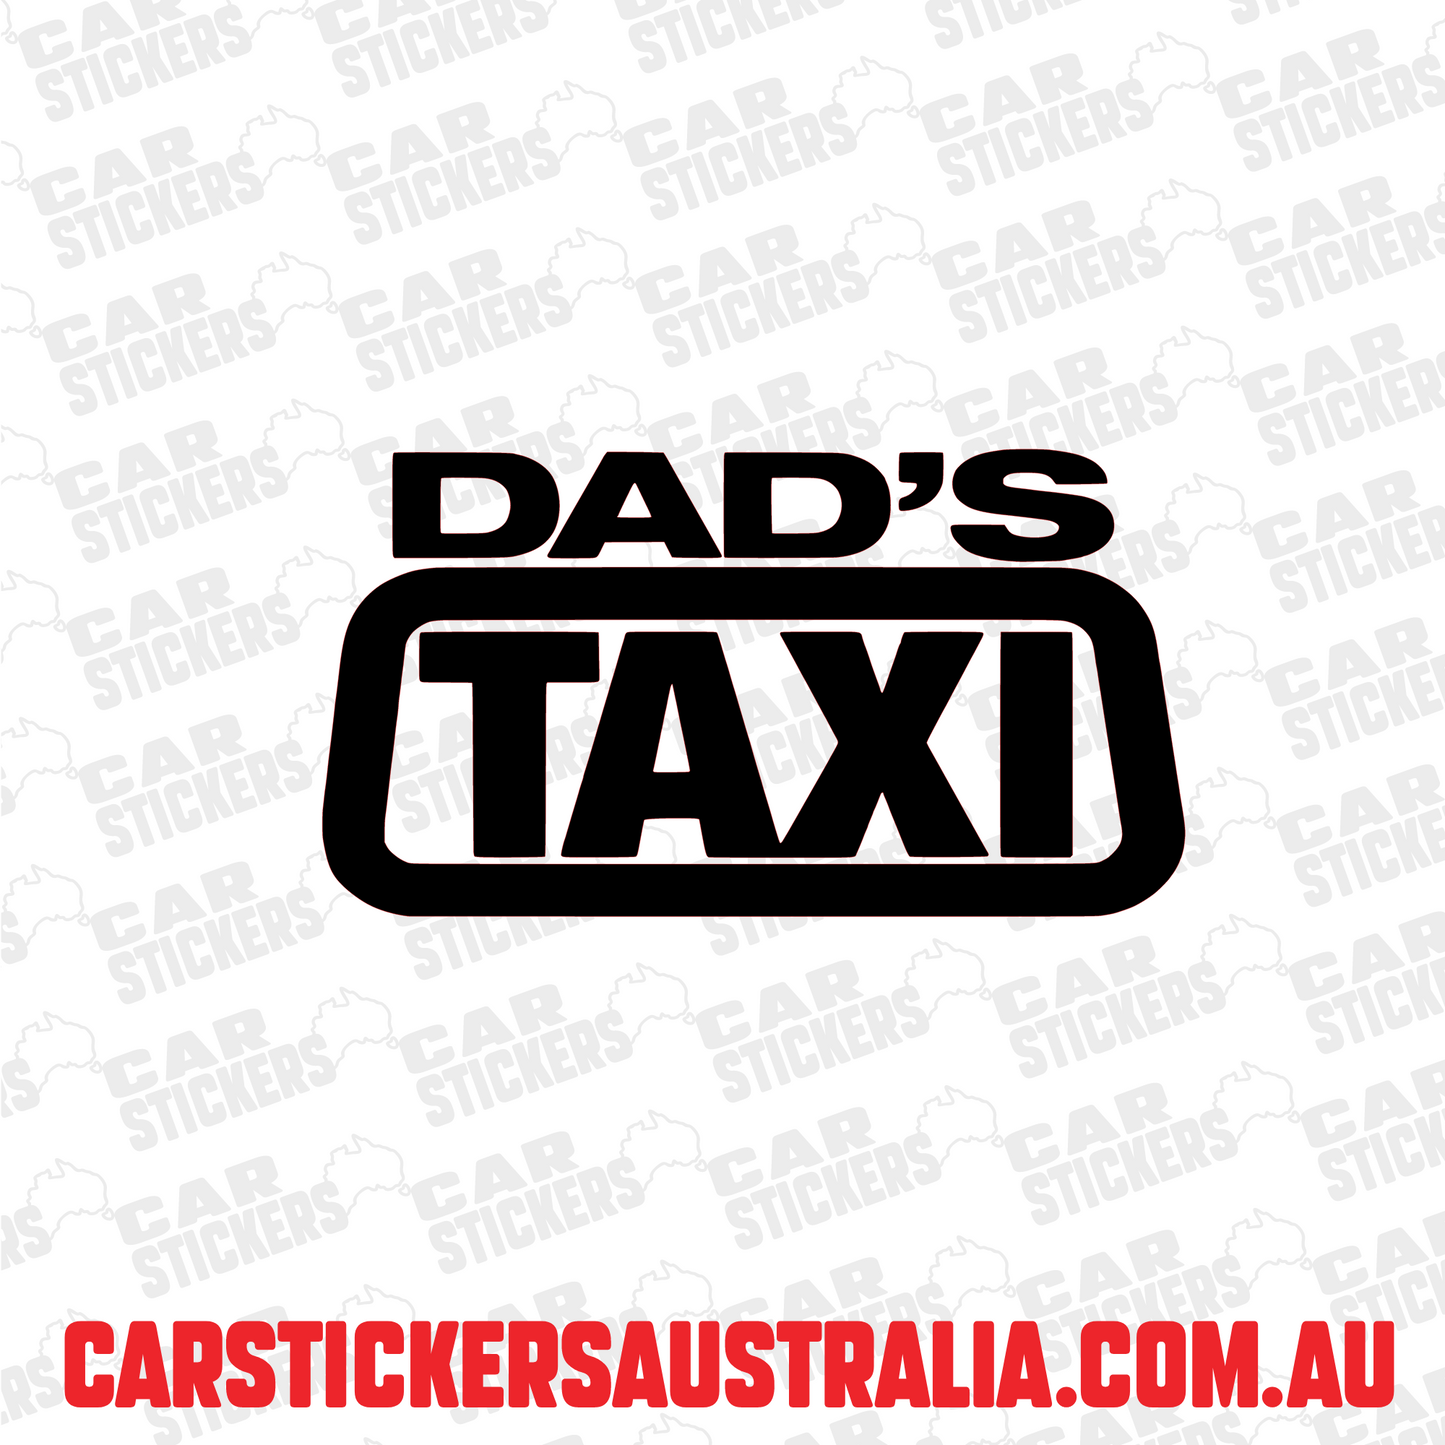 Dads Taxi